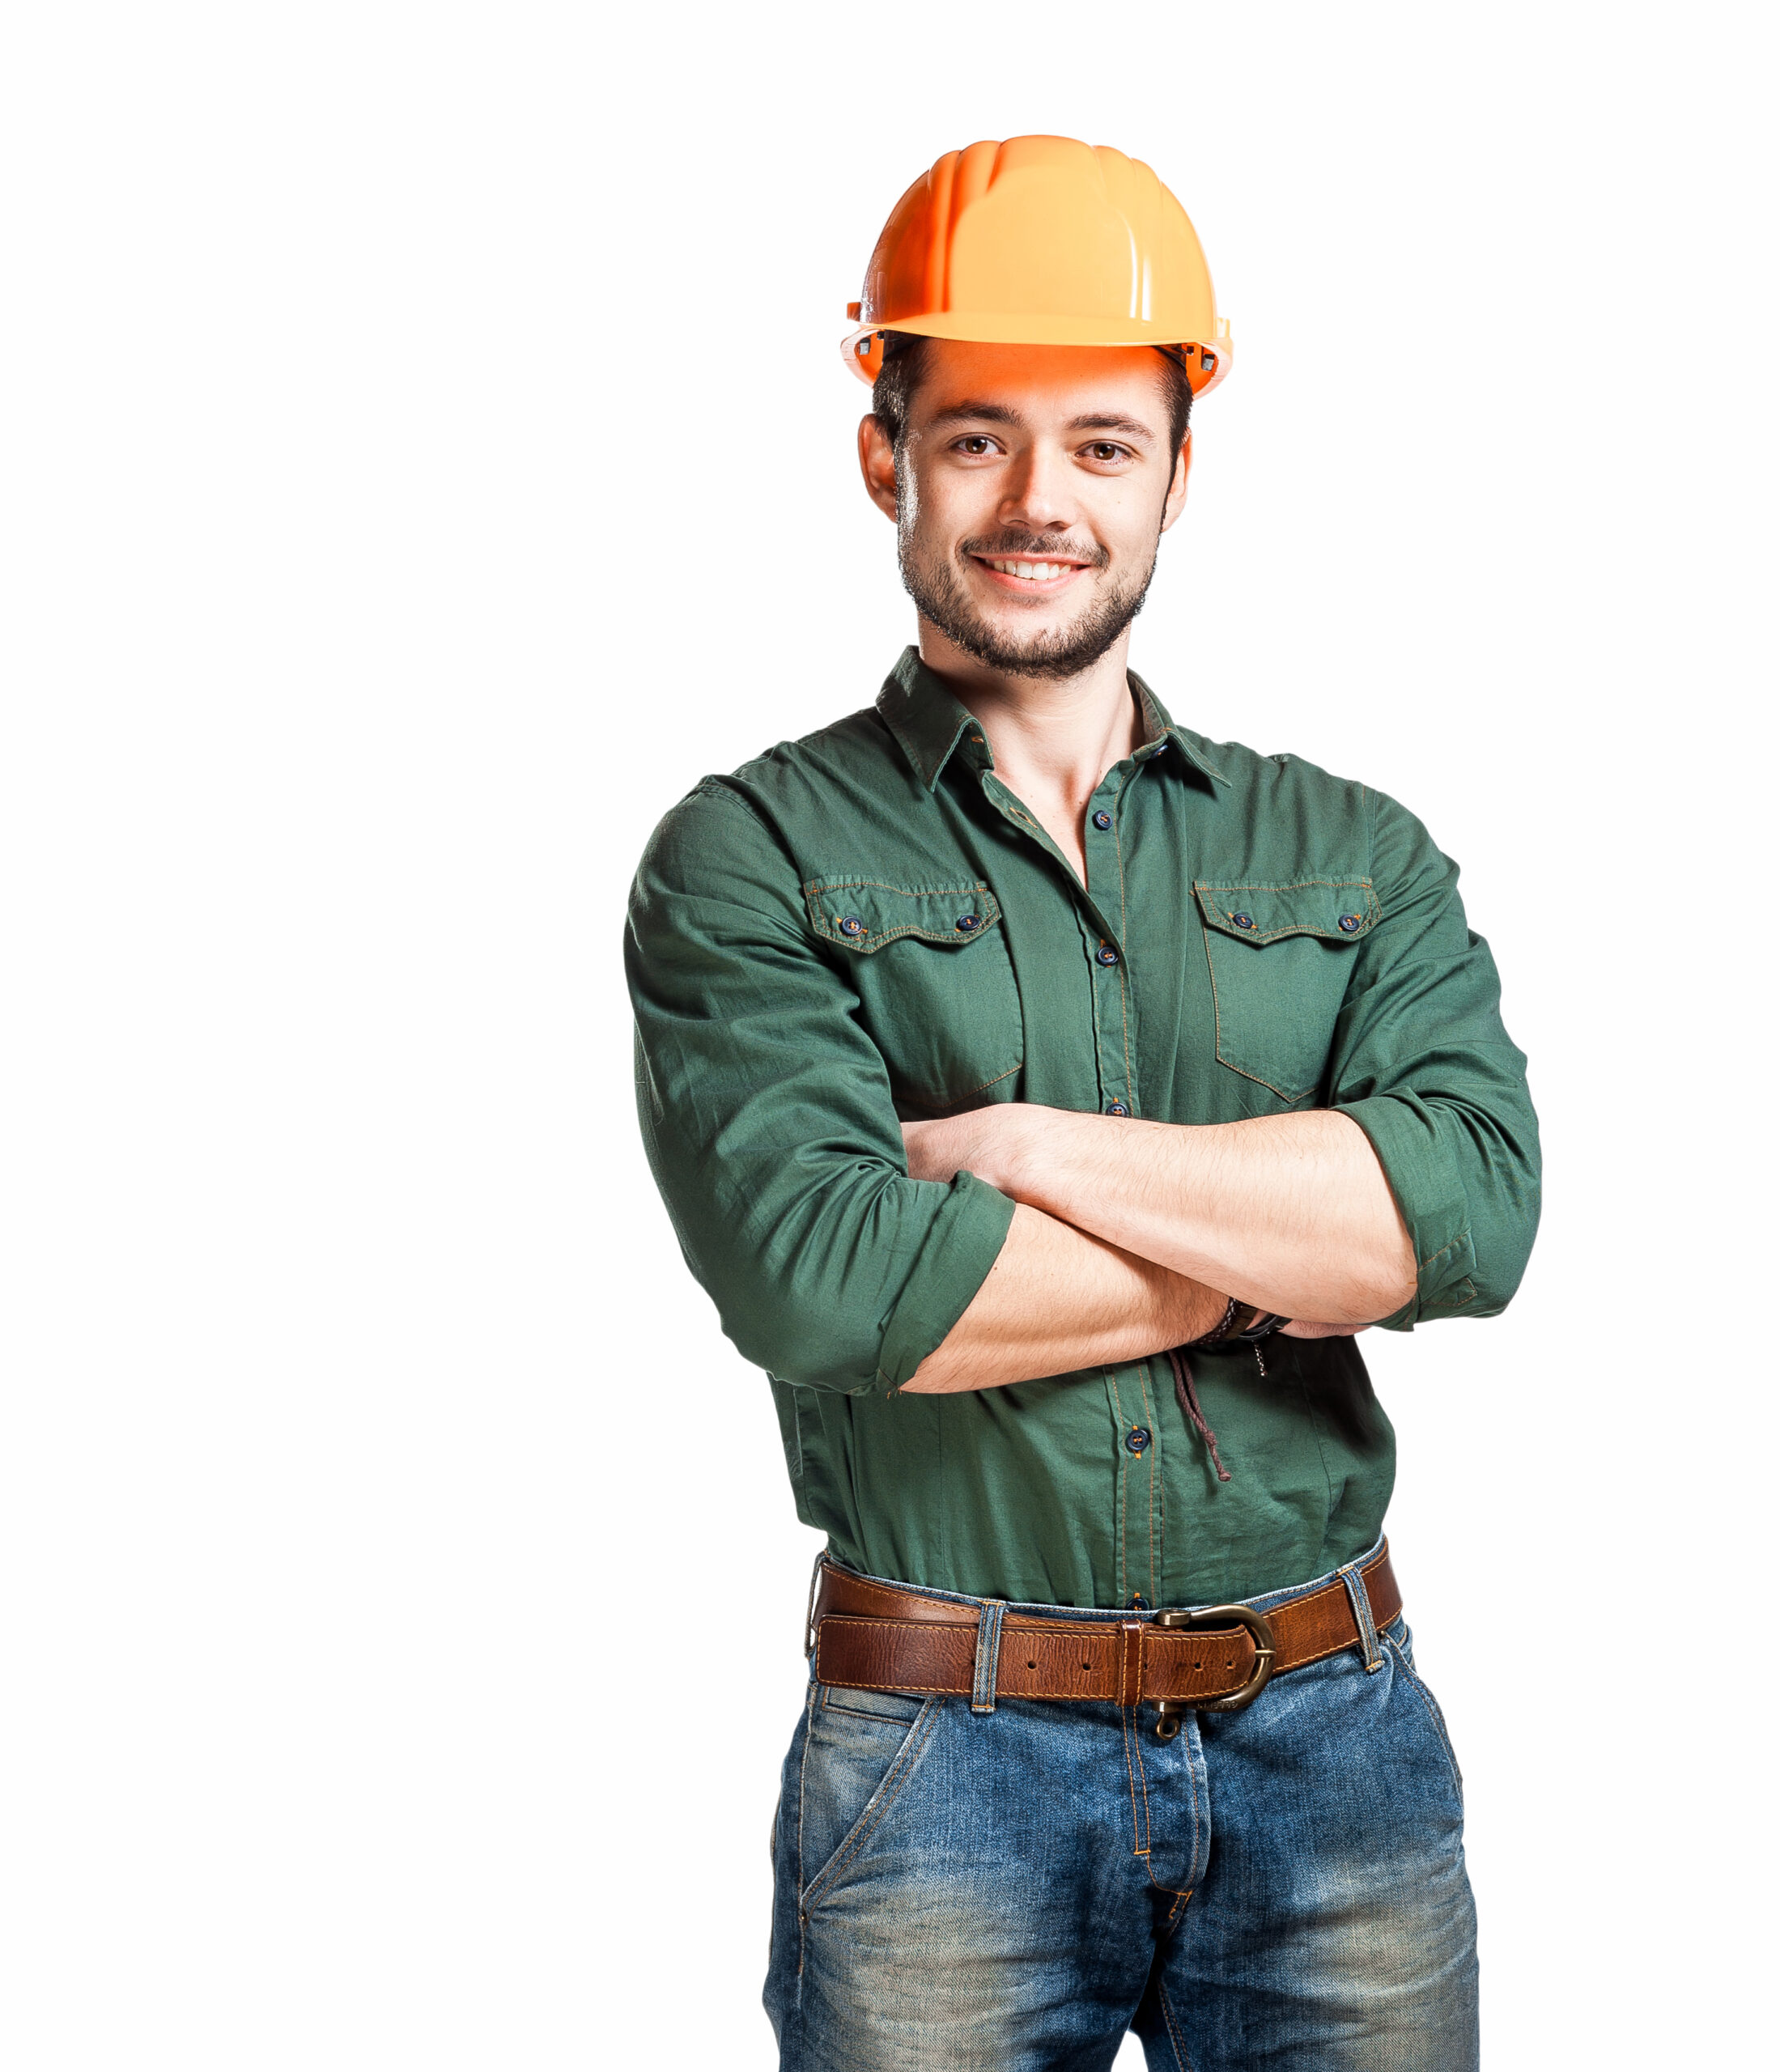 Young construction workers in hard hats on a white background